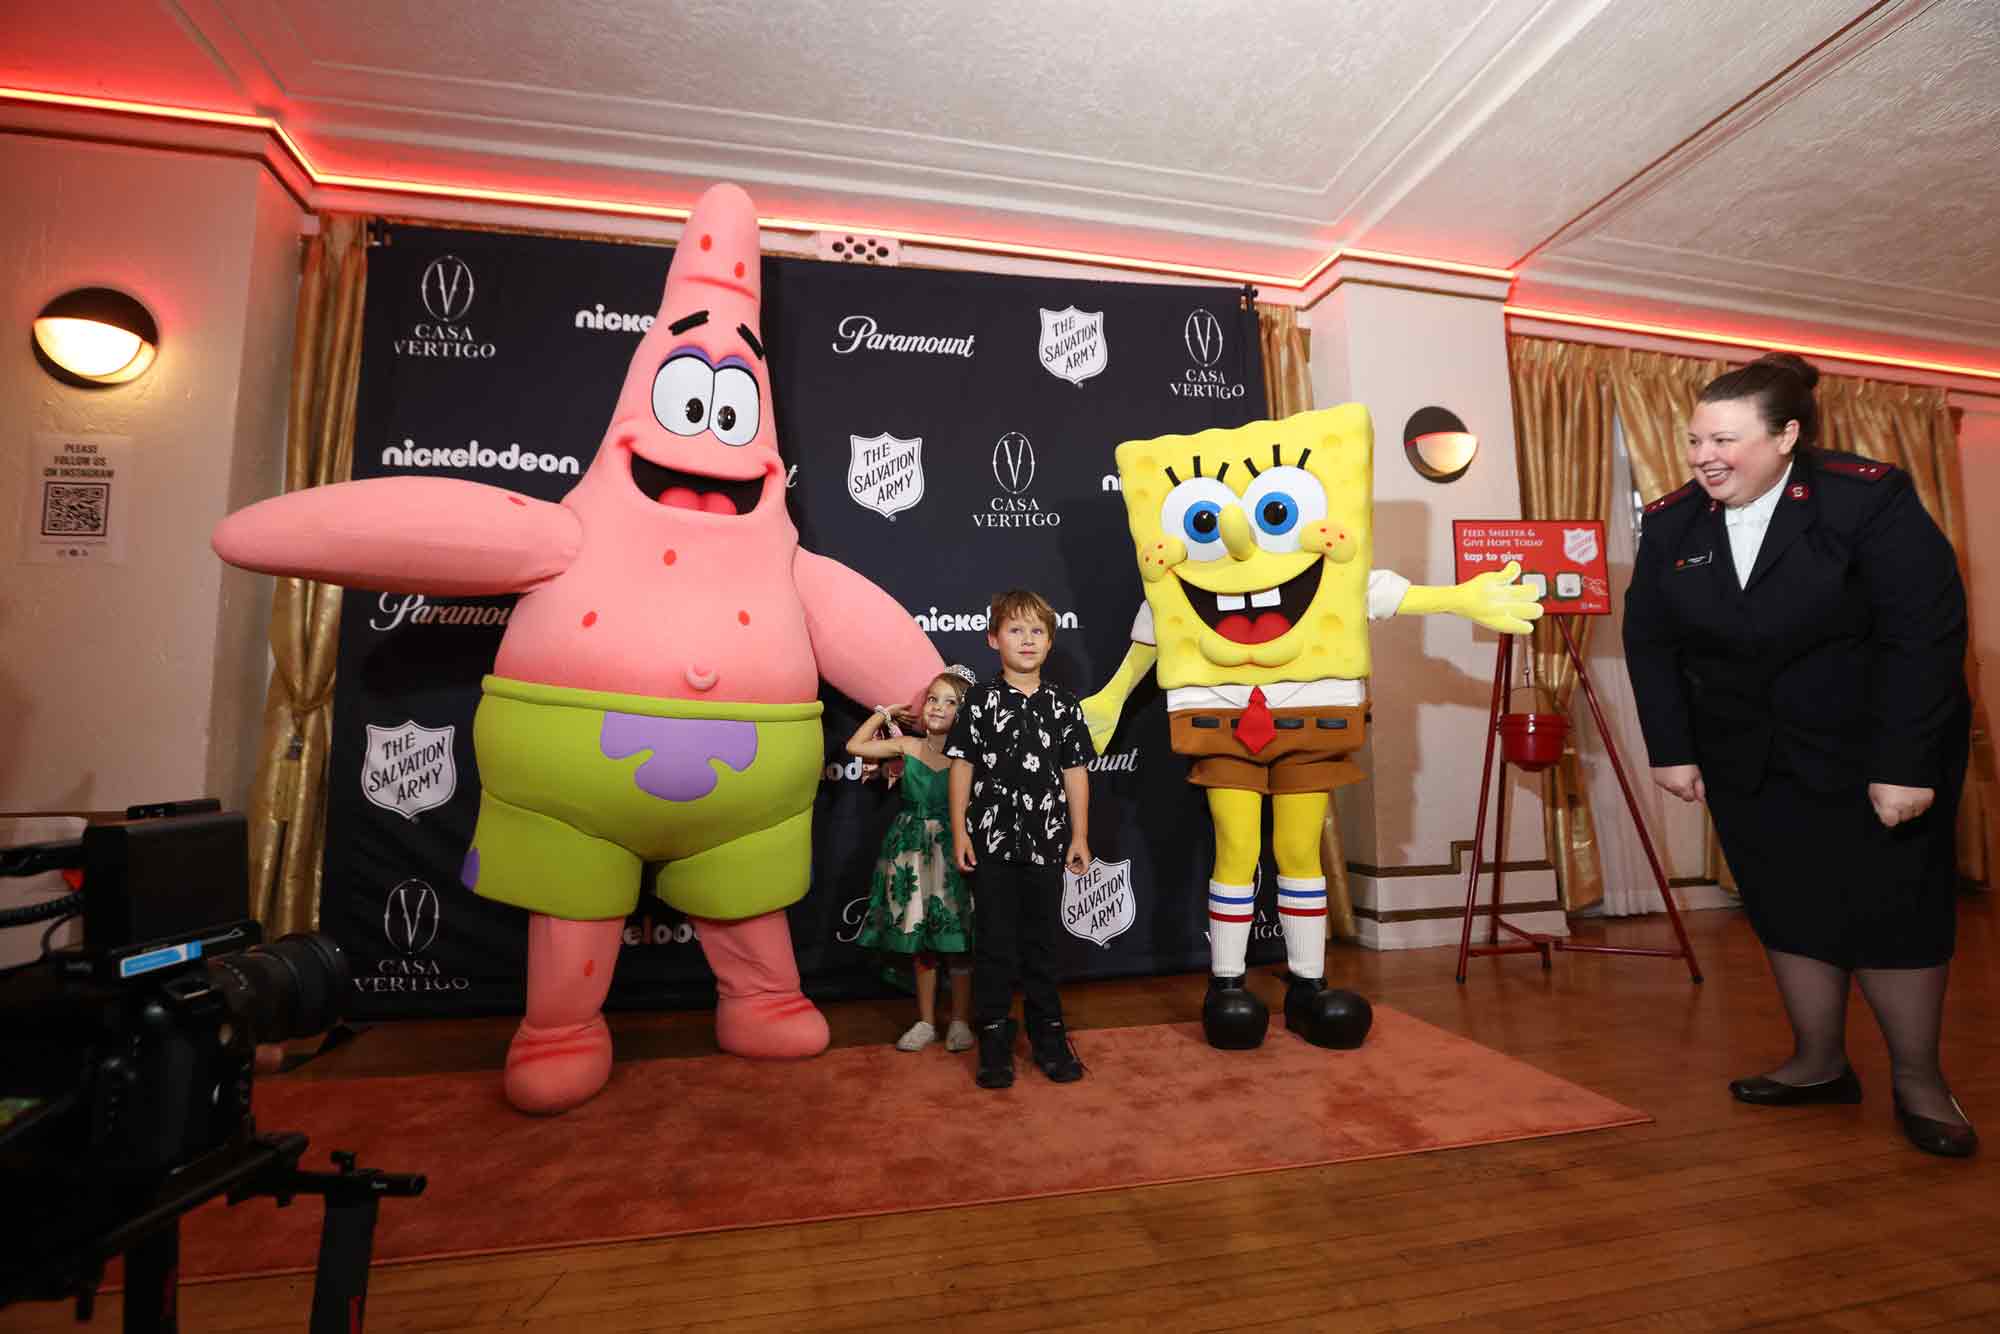 SpongeBob brings smiles at Feast of Sharing Thanksgiving meal event